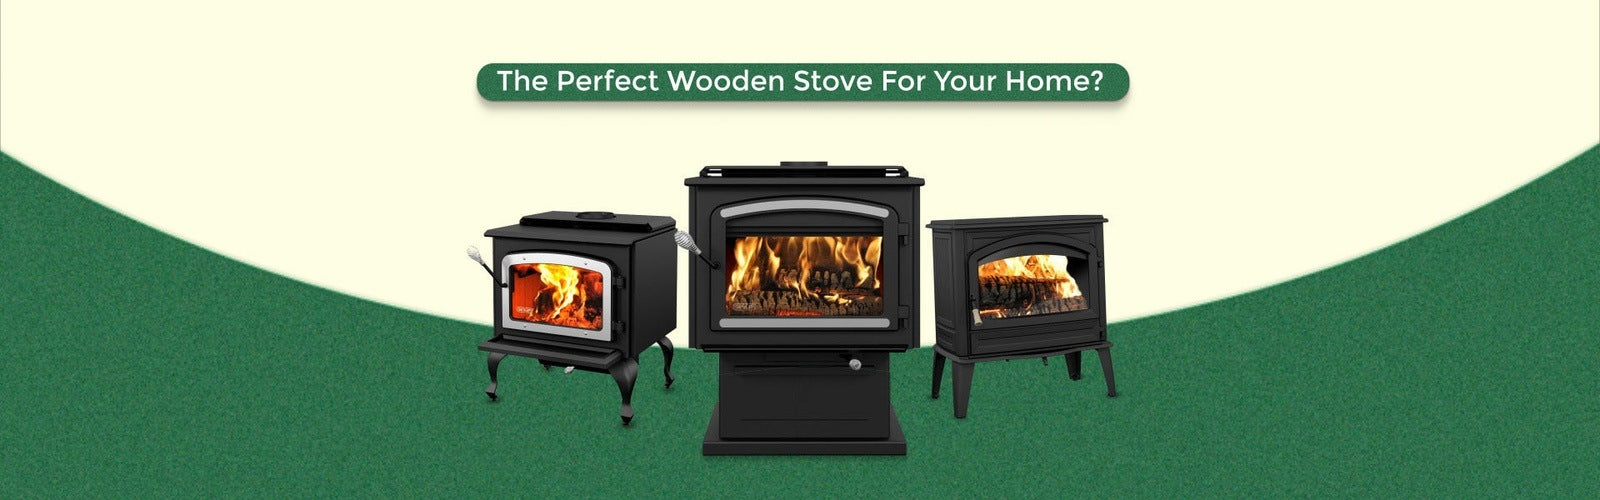 A Complete Guide to Choosing the Best Wooden Stove for Your Home